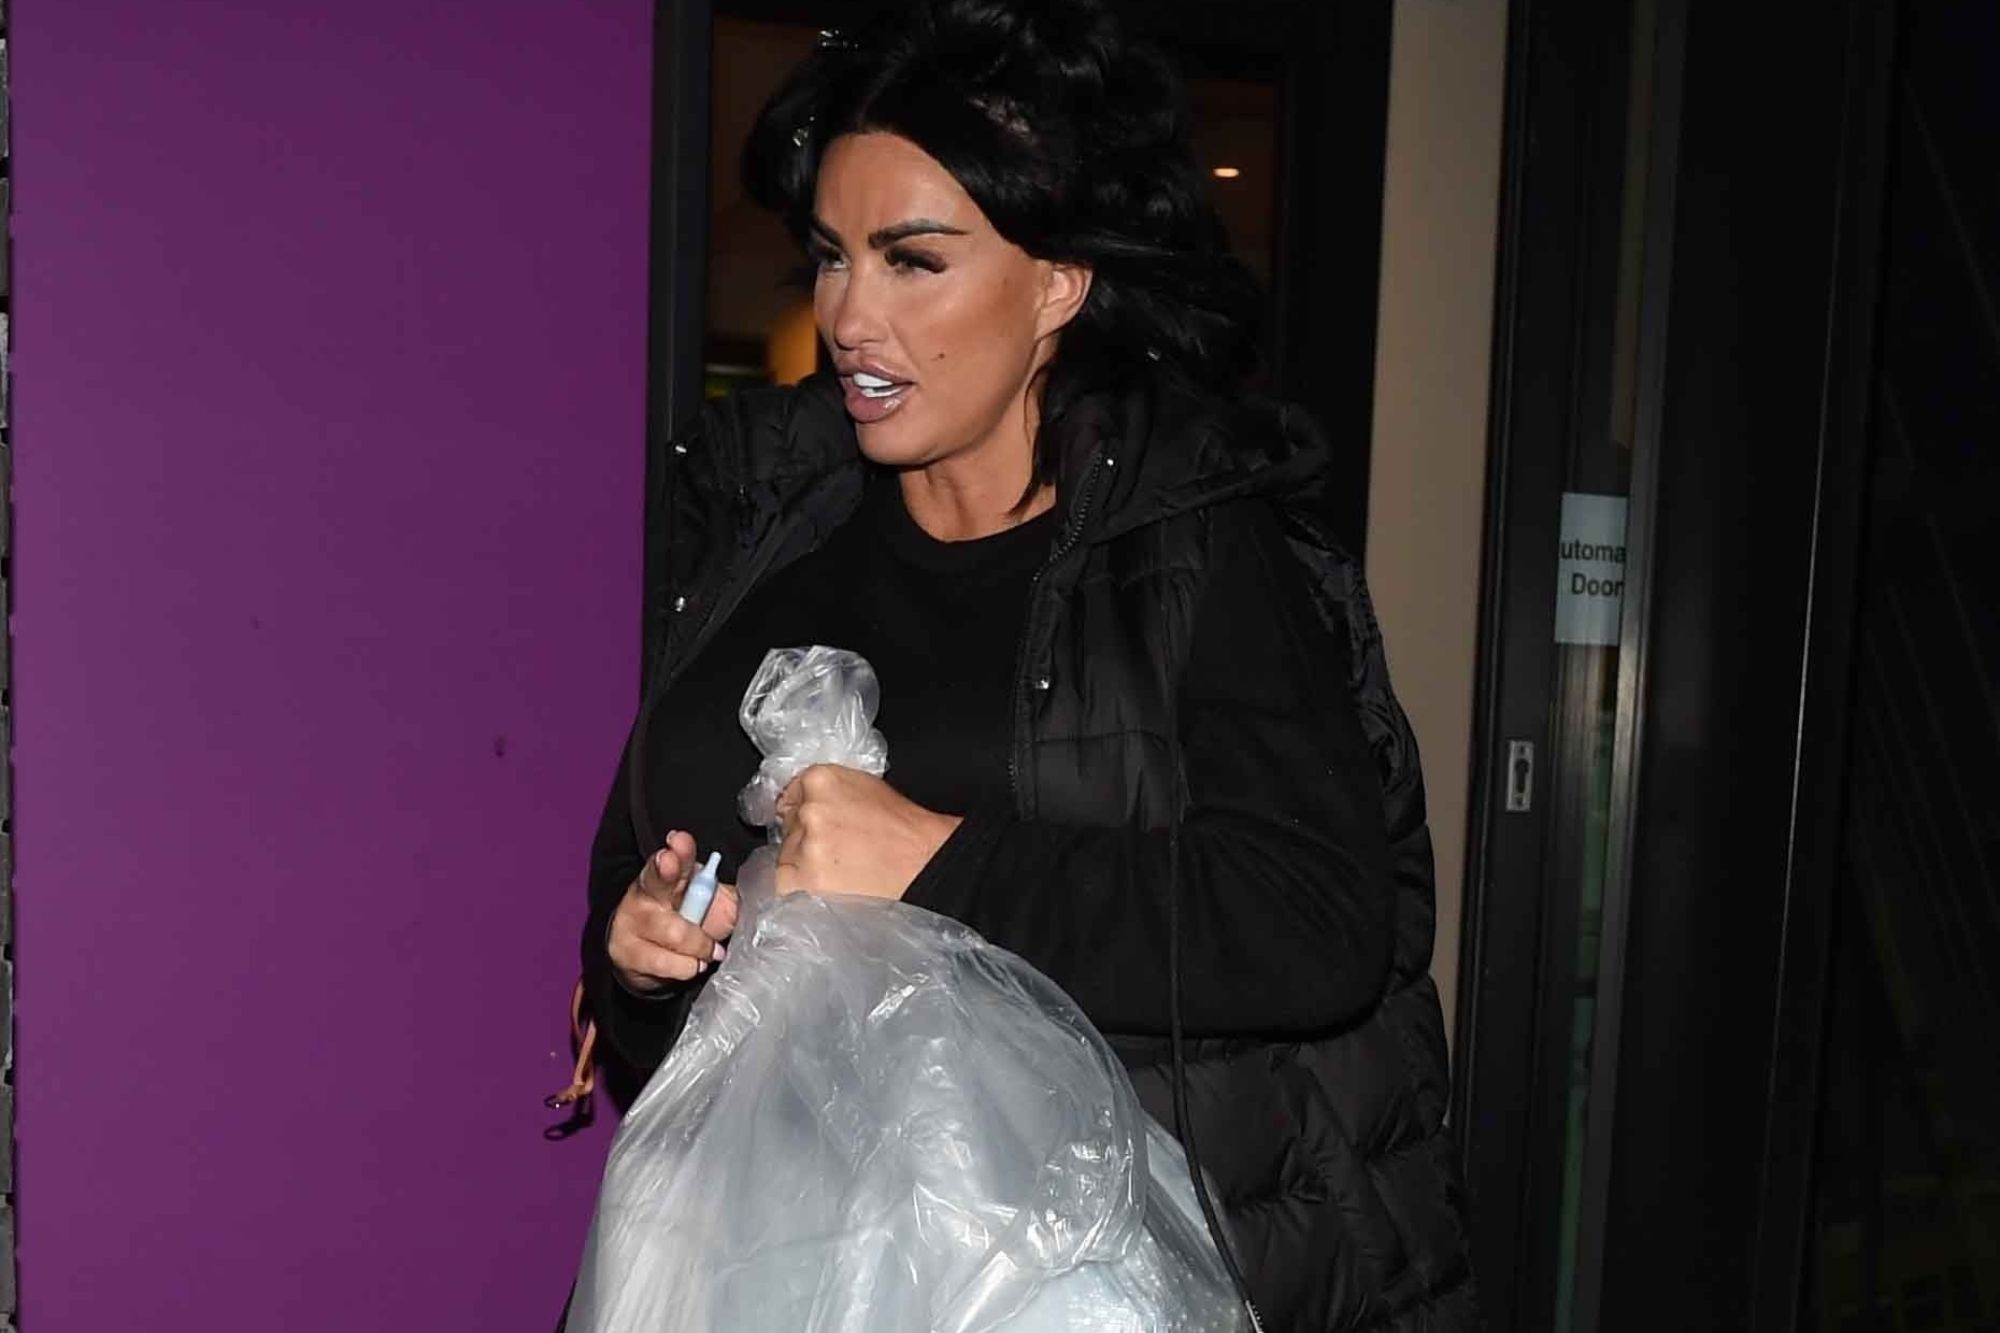 Katie Price carries huge bag in front of her stomach after sparking pregnancy rumours | The Sun